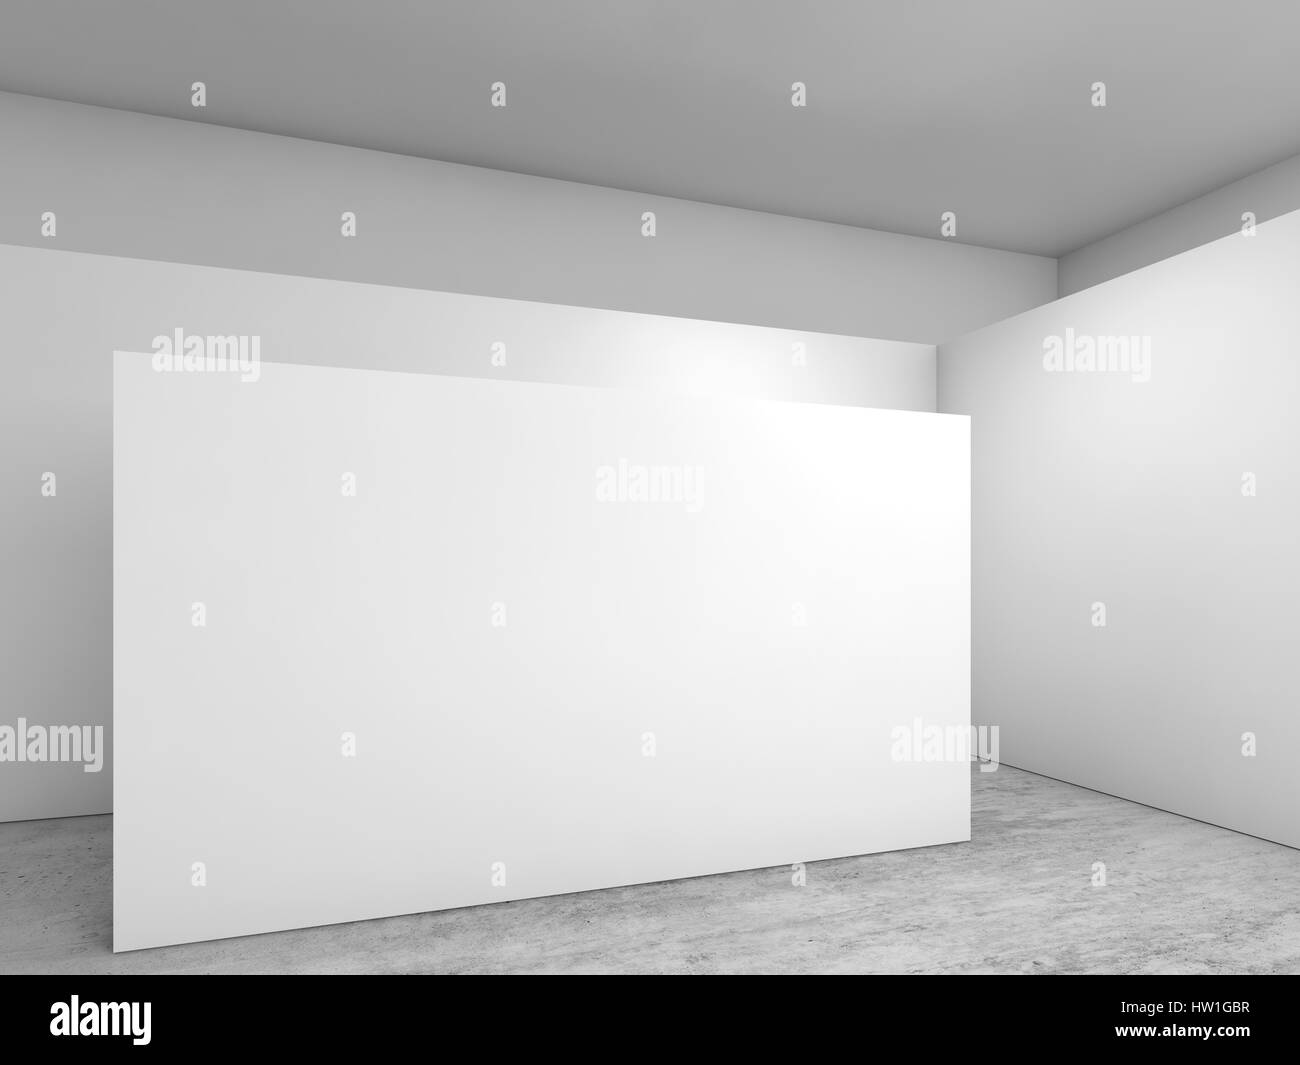 Abstract empty white interior, banners installation on concrete floor, contemporary architecture design. 3d illustration Stock Photo